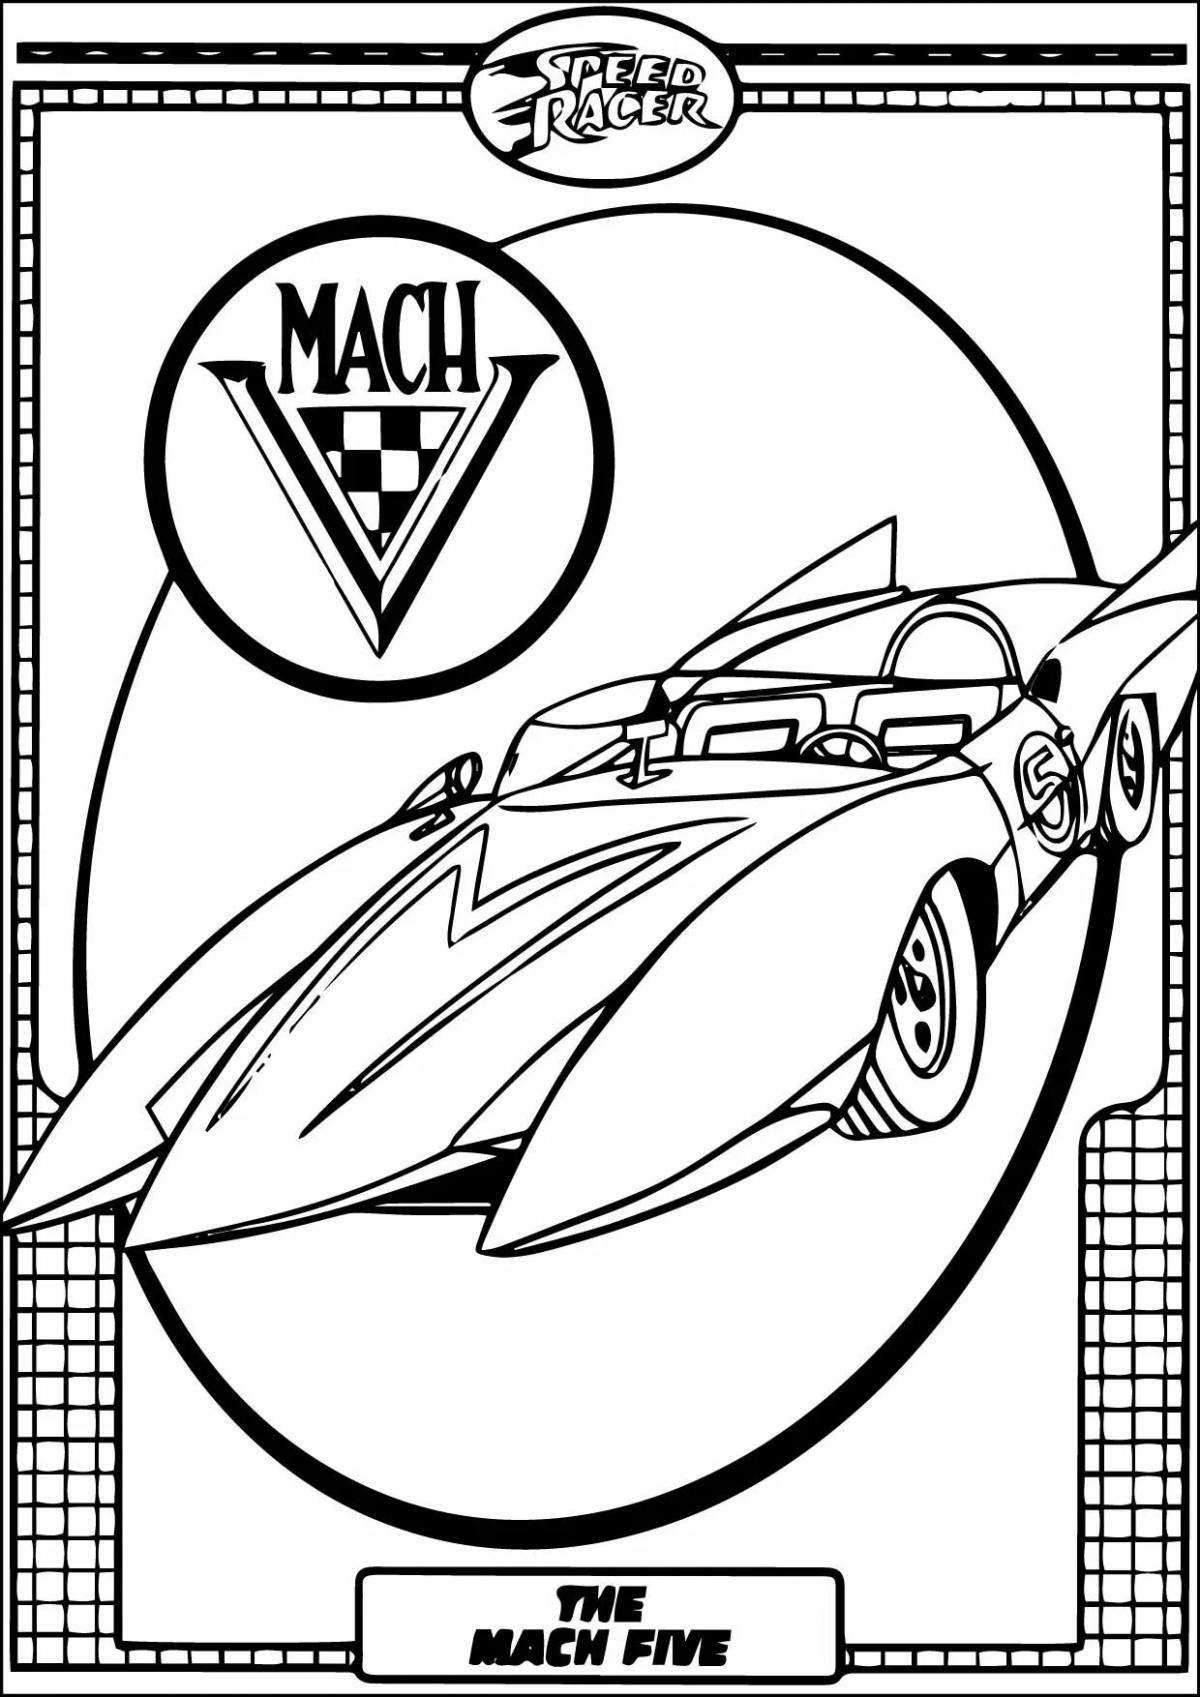 Exciting need for speed coloring page